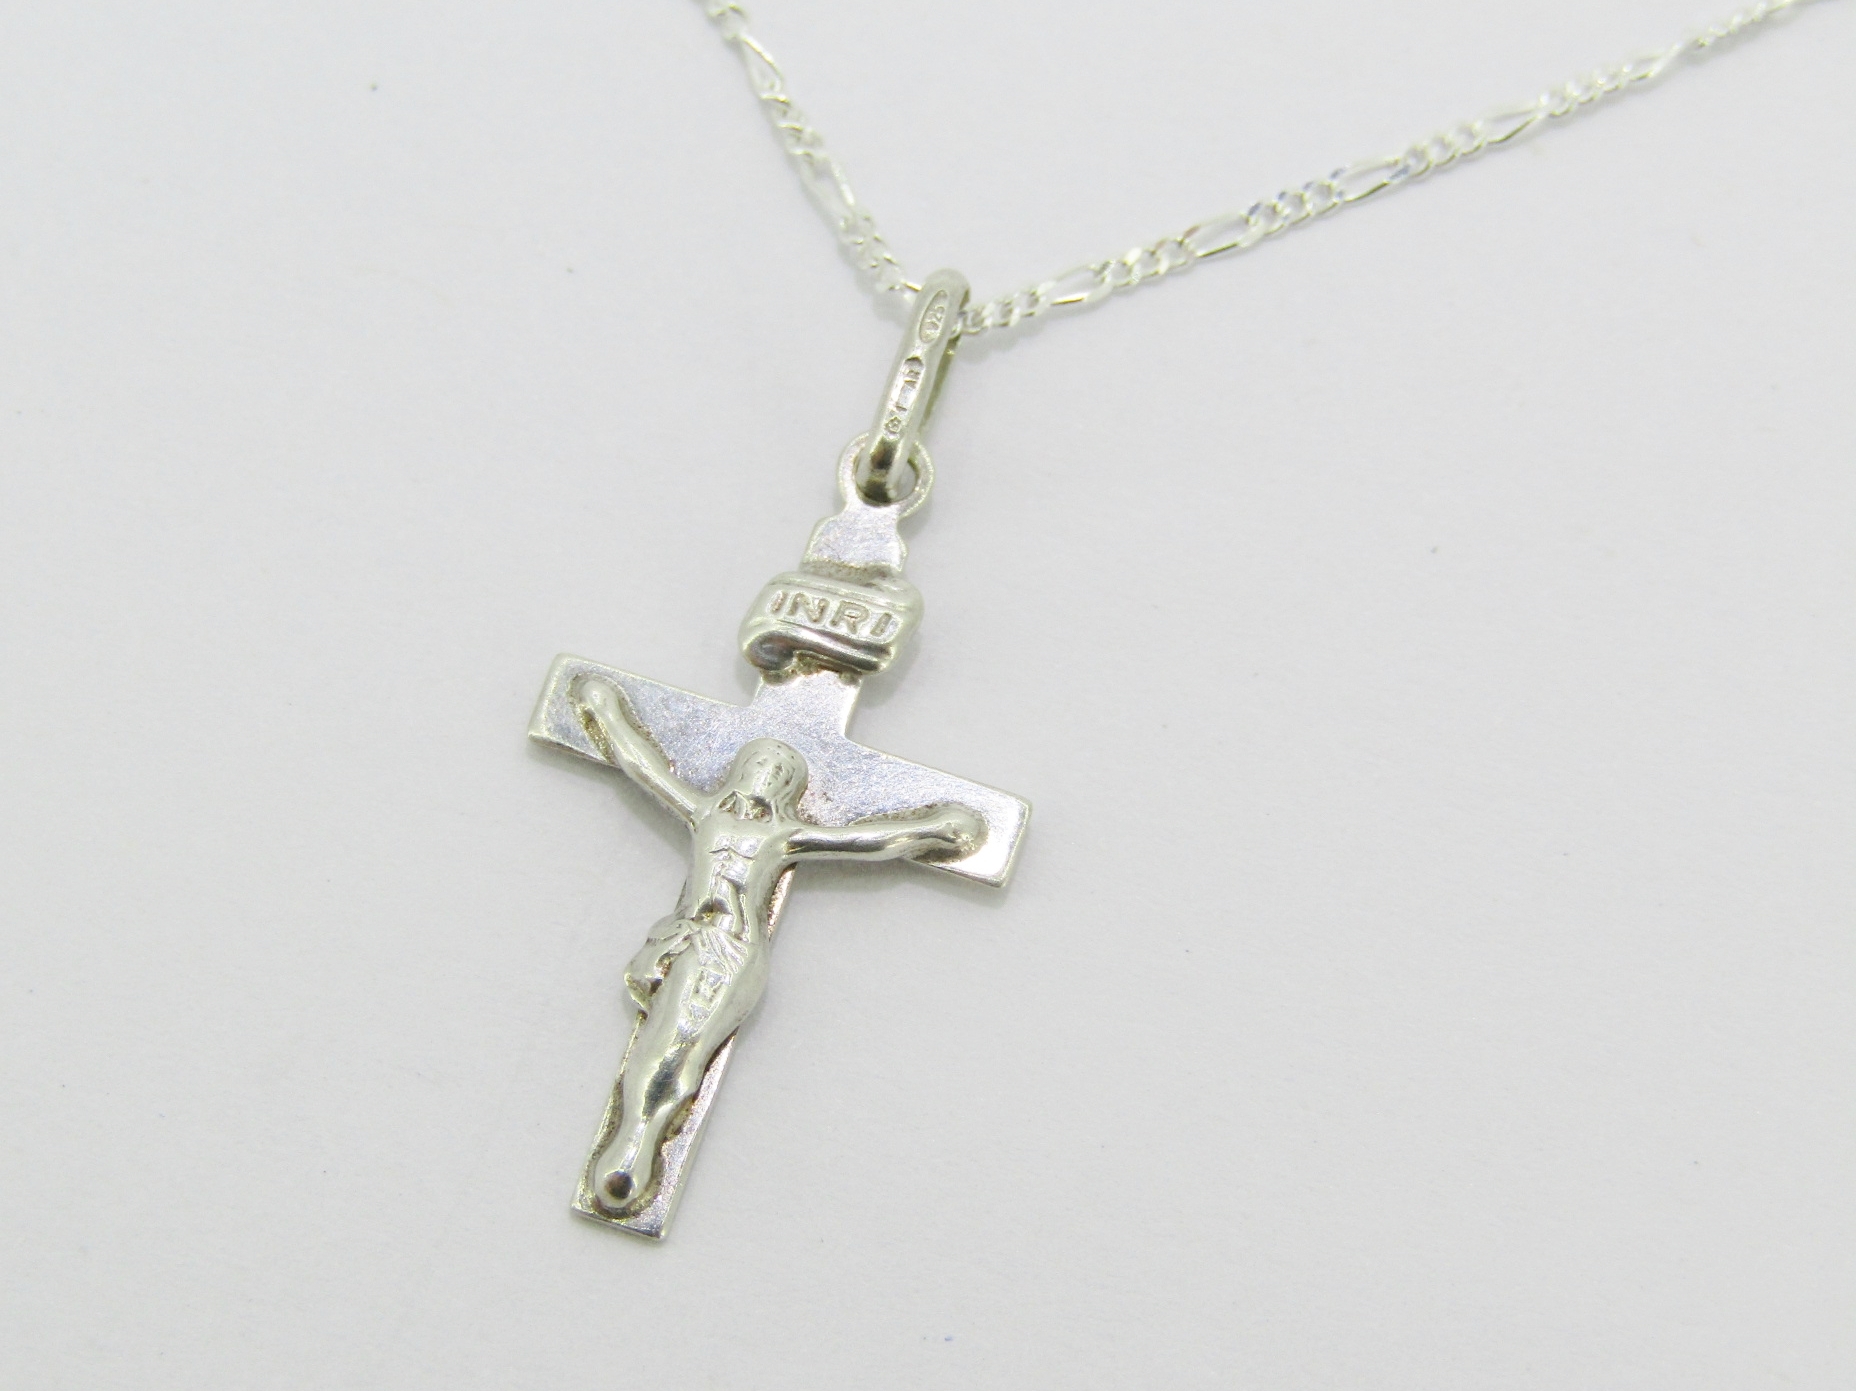 A Beautiful Dainty Crucifix Pendant On Chain in Sterling Silver.